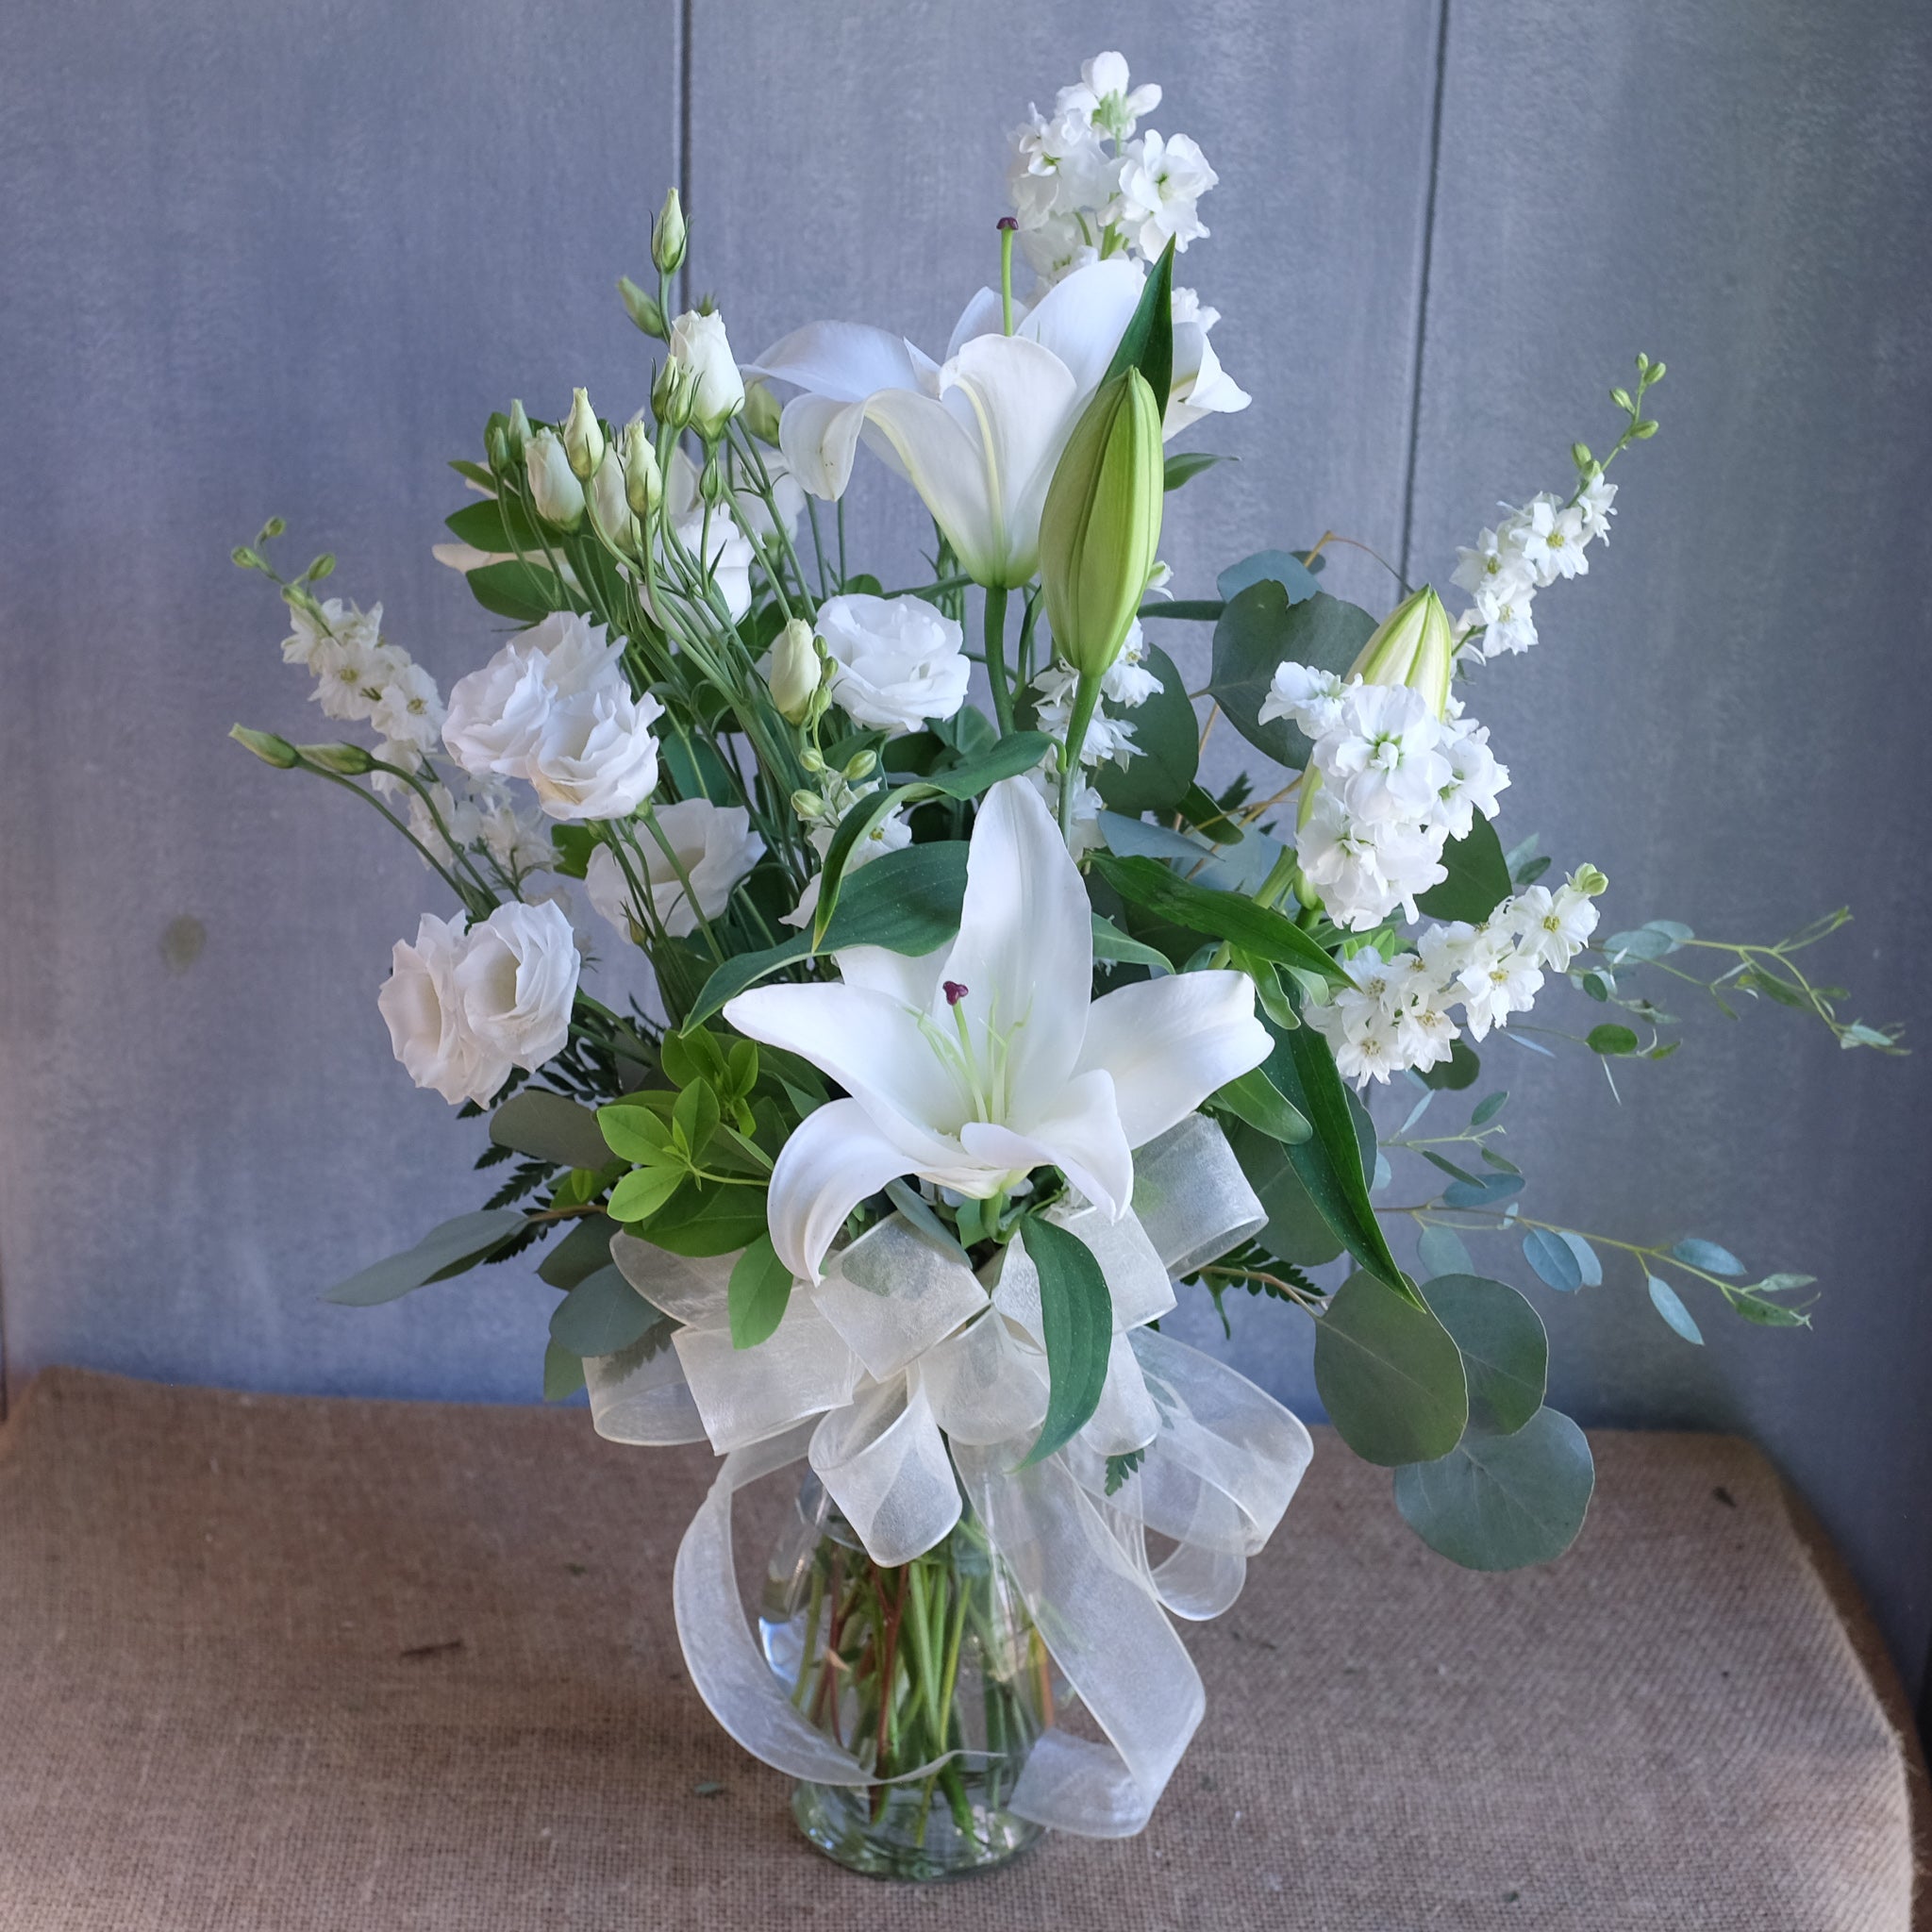 tall and elegant floral arrangement with lilies, ranunculus, and greenery by Michler's